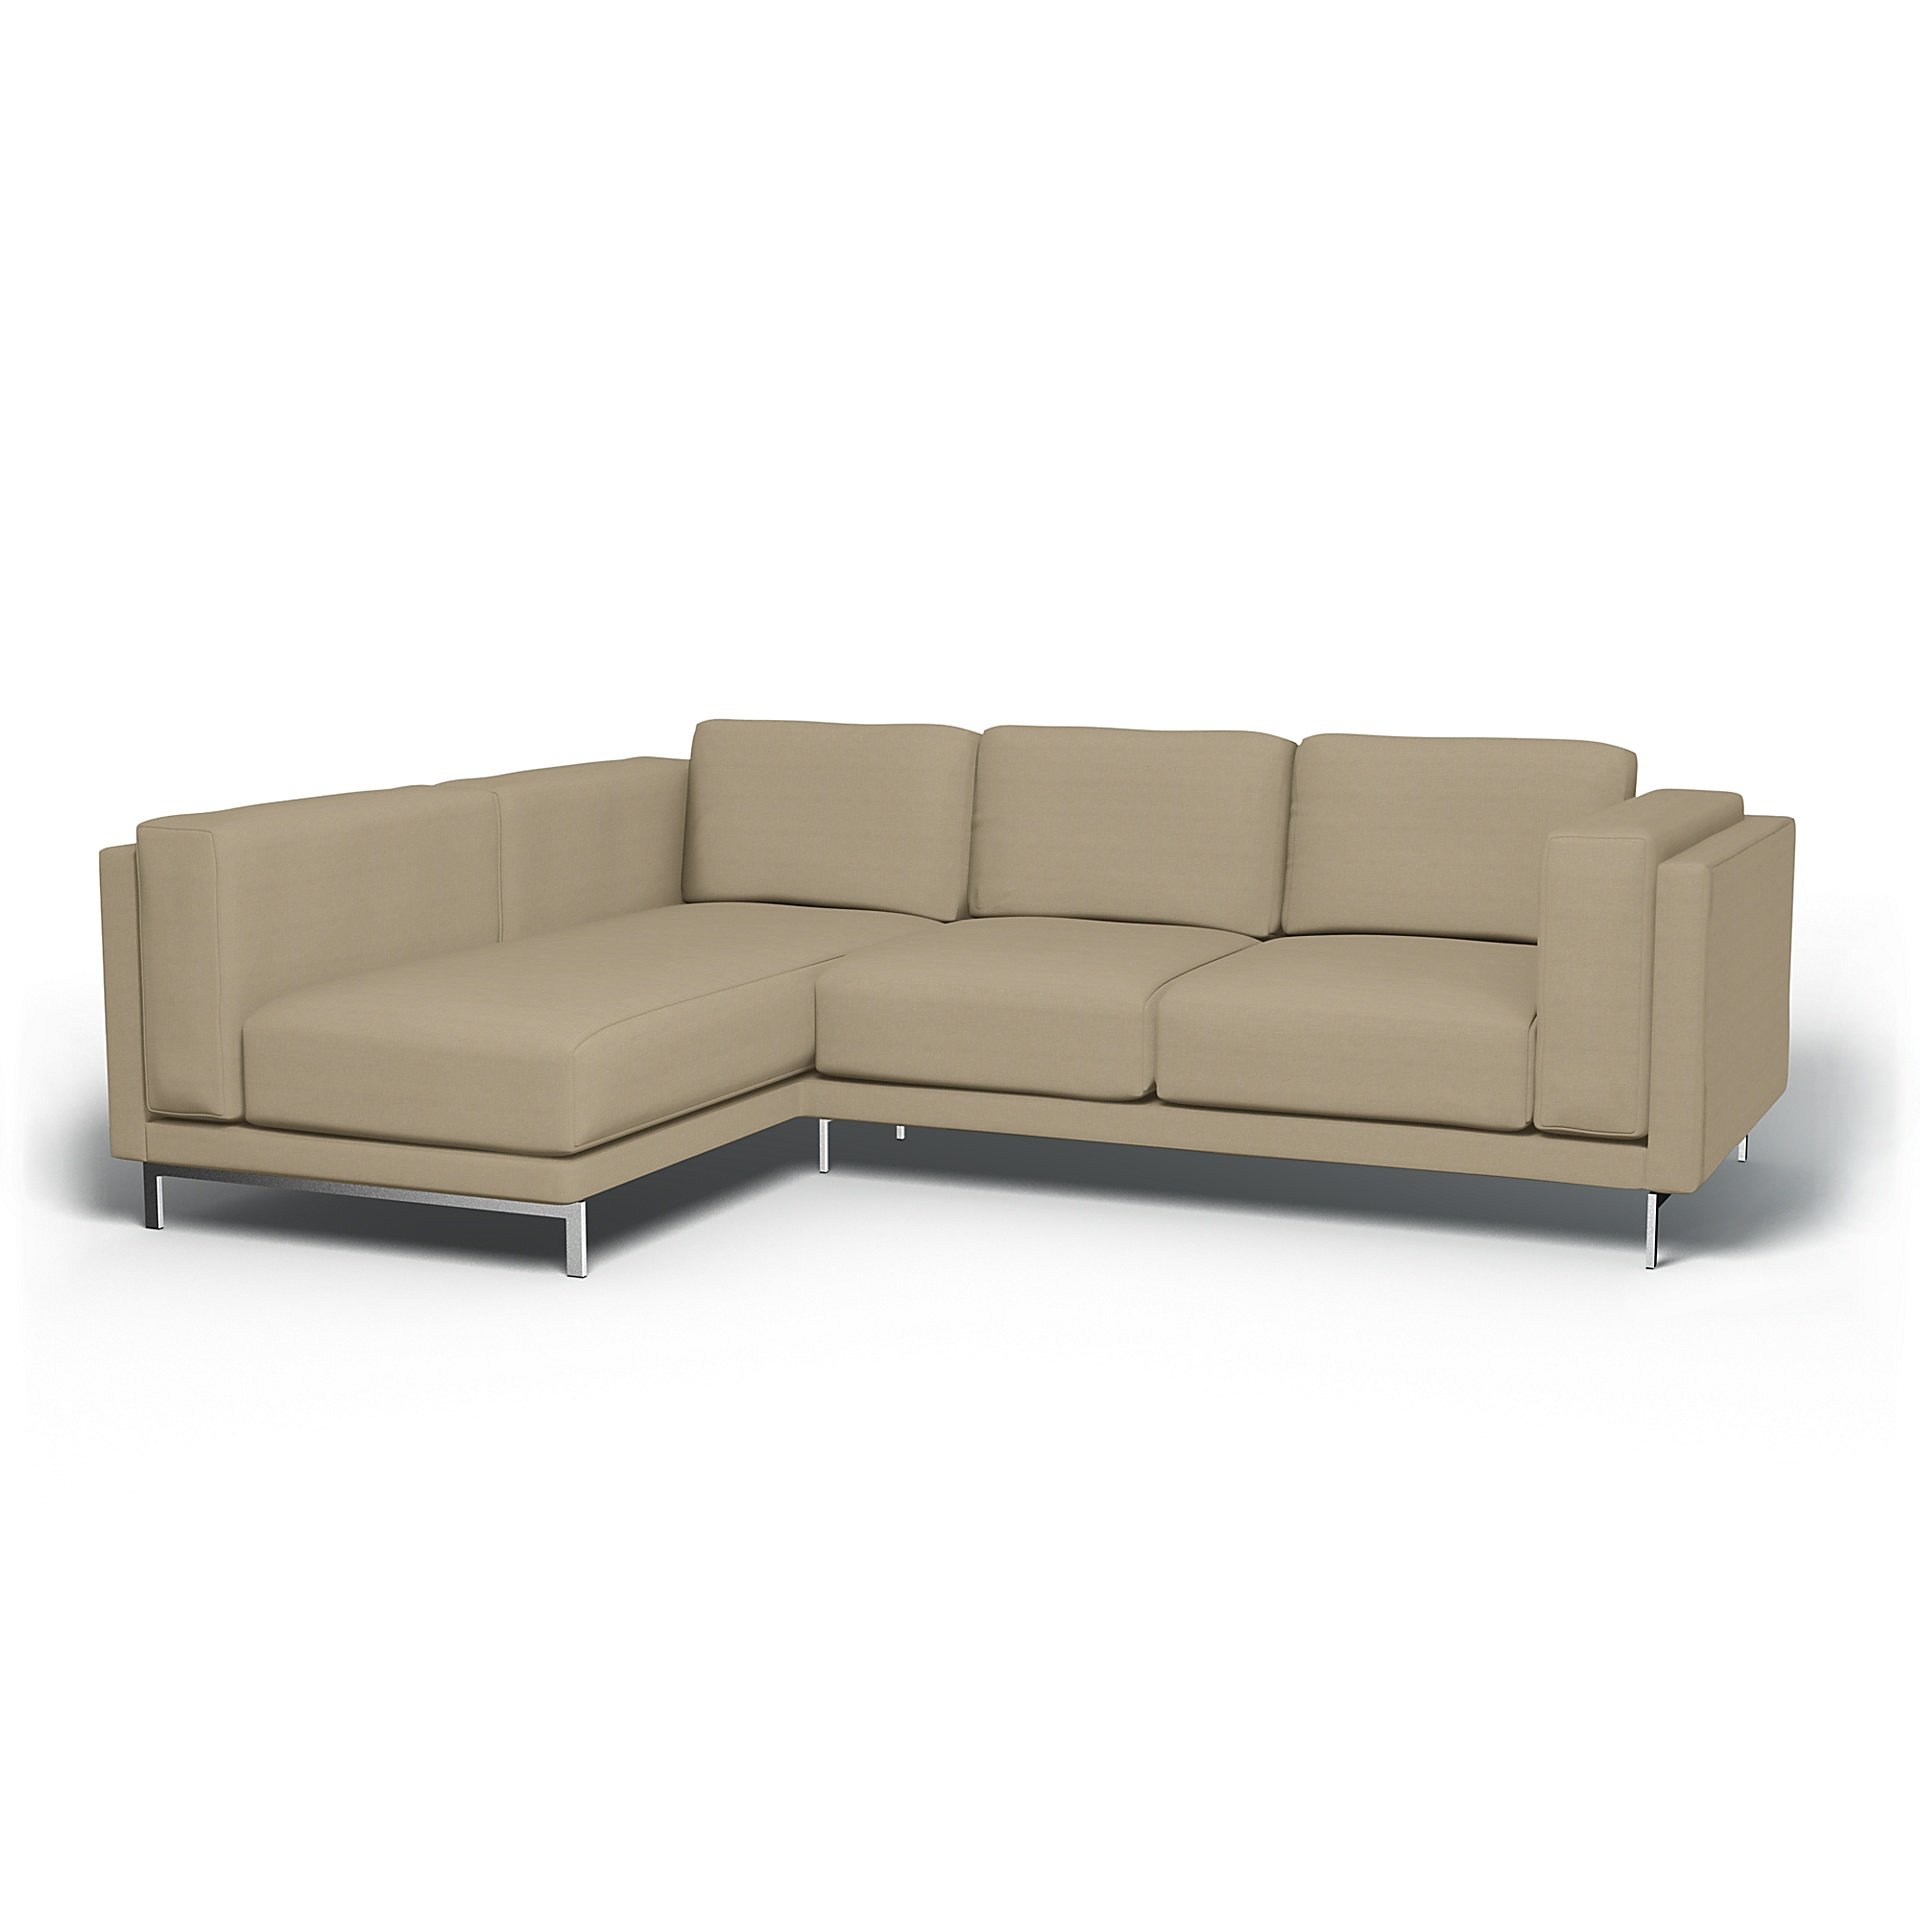 IKEA - Nockeby 3 Seater Sofa with Left Chaise Cover, Tan, Linen - Bemz